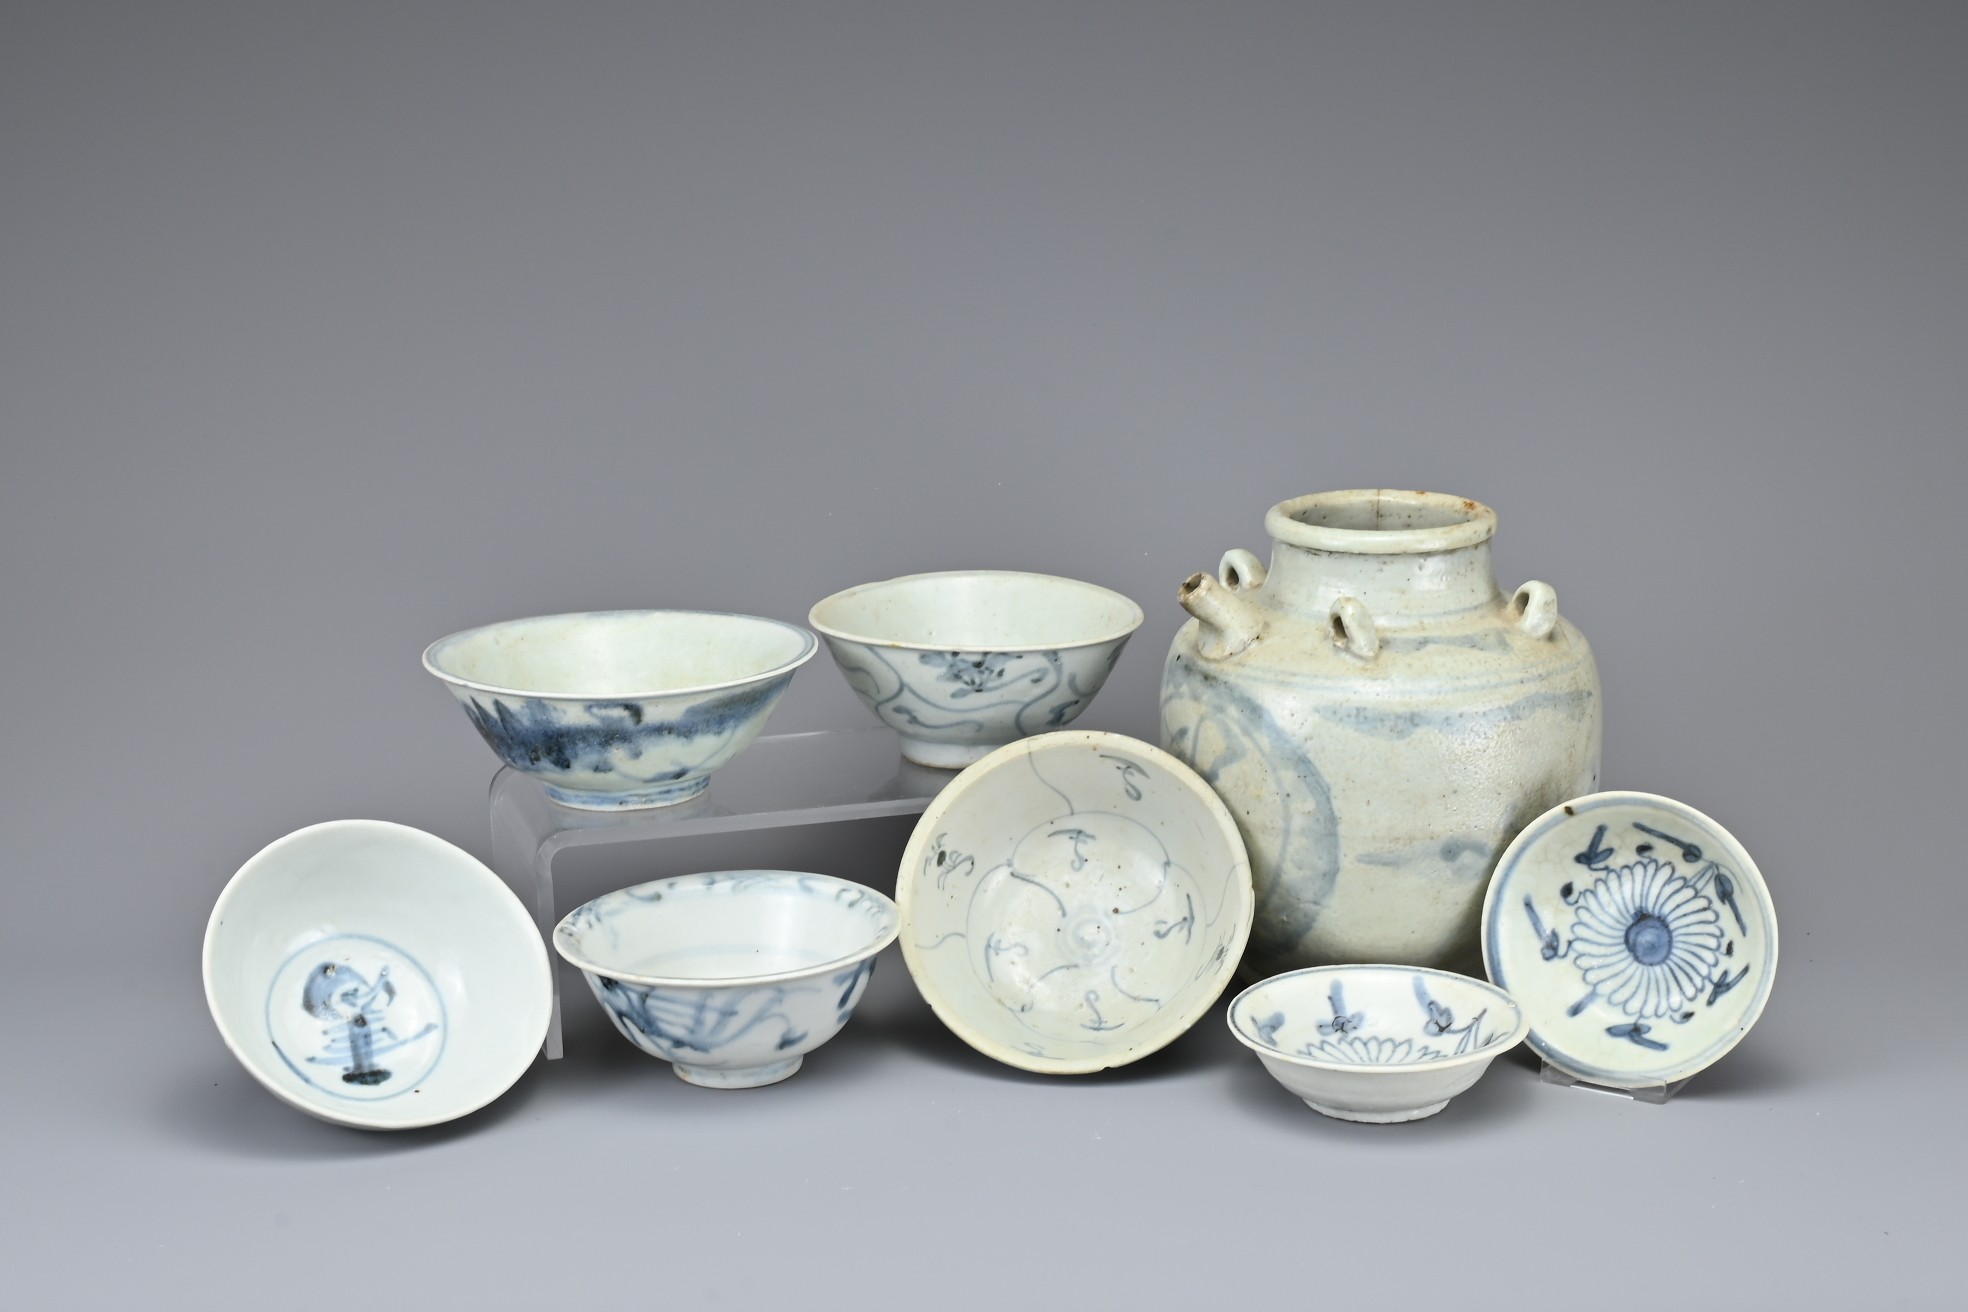 A GROUP OF CHINESE BLUE AND WHITE PORCELAIN ITEMS, MING TO QING DYNASTY. Comprising a ewer with four